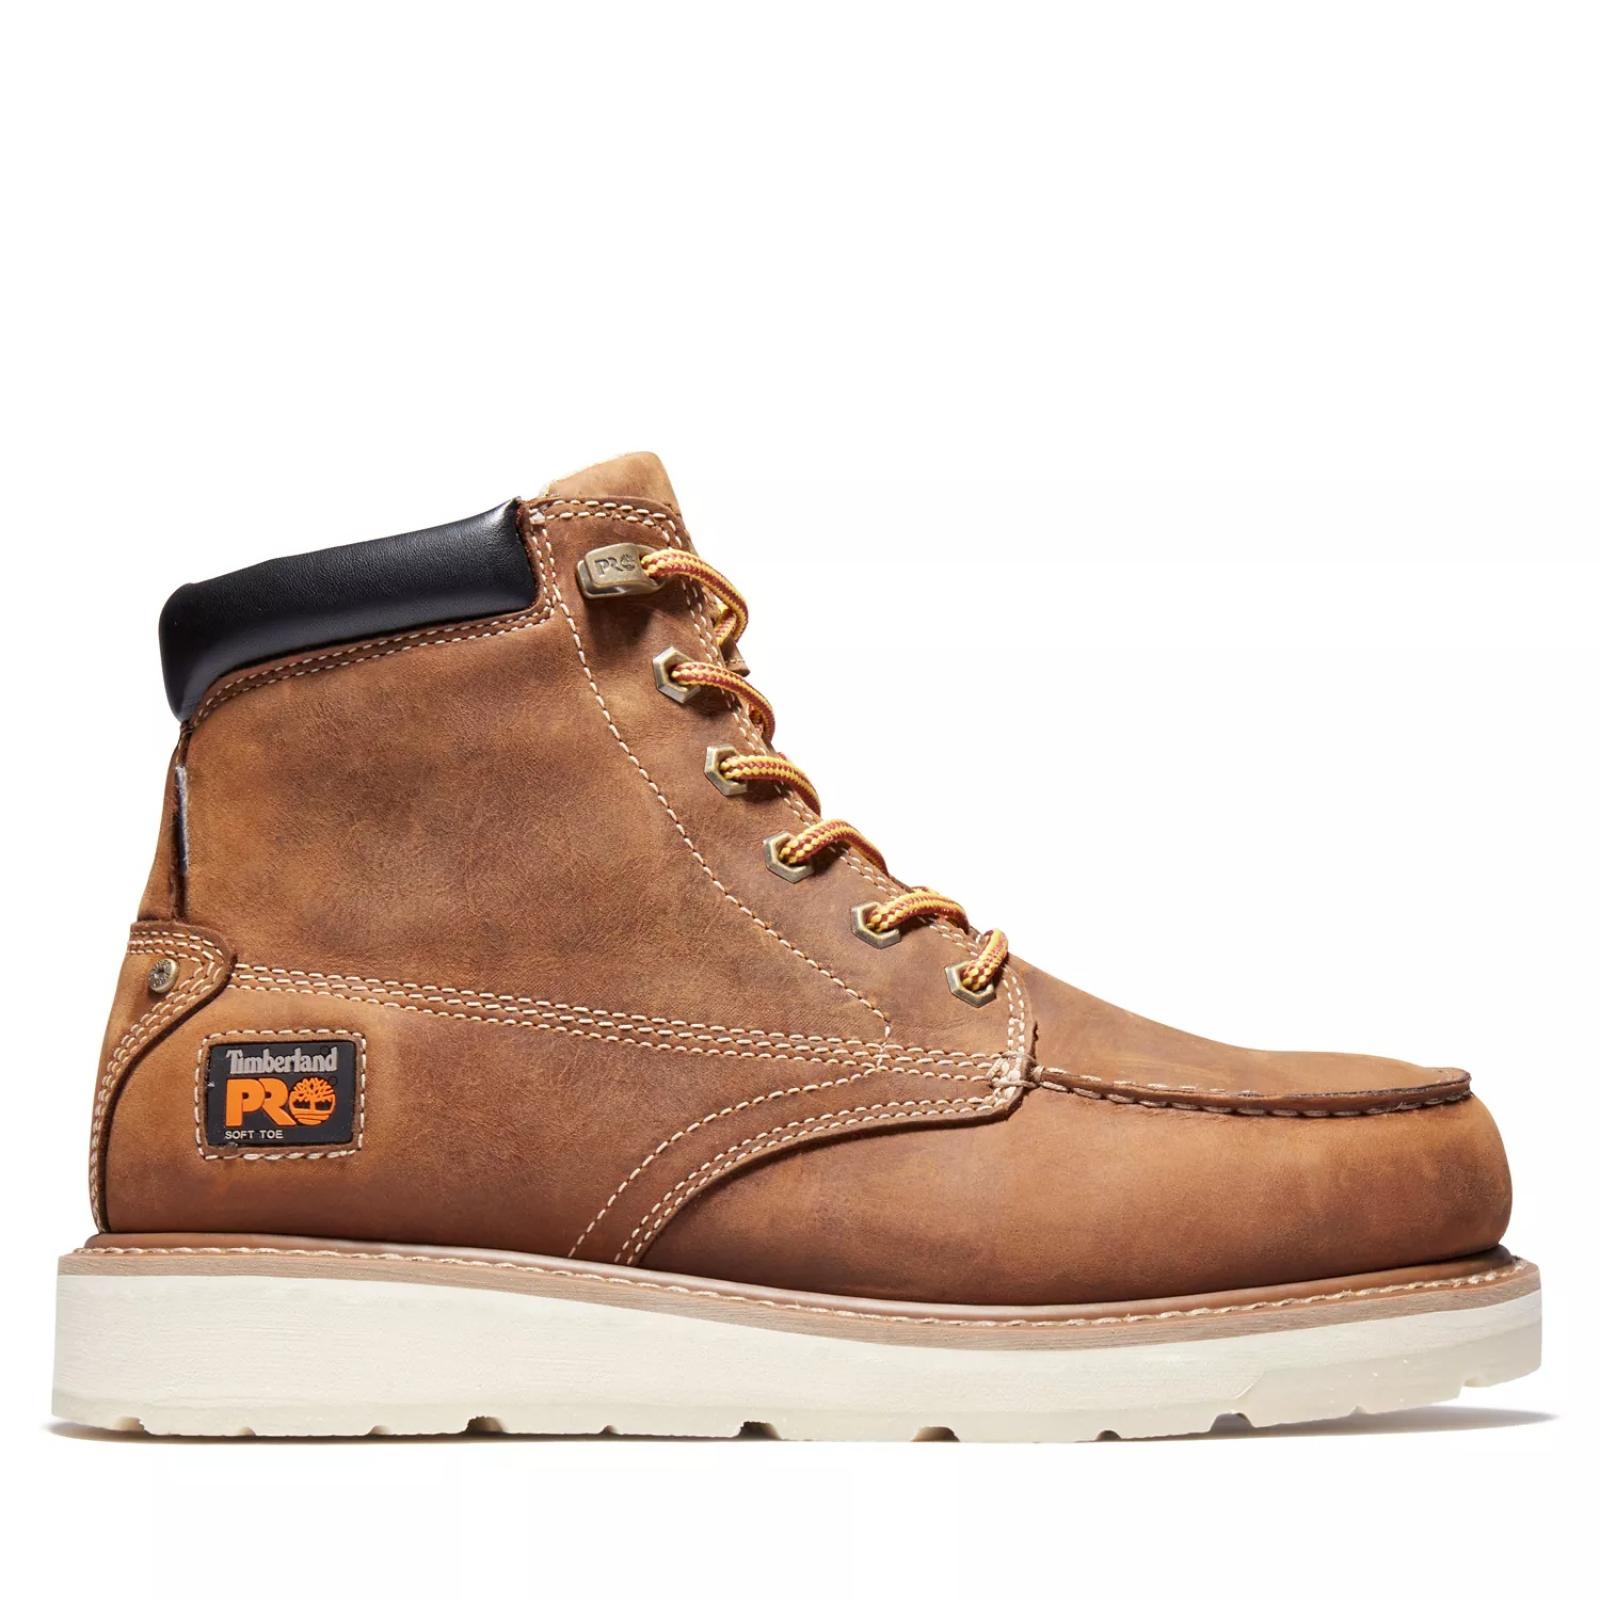 Timberland PRO Men's Gridworks 6" Soft Toe Boots